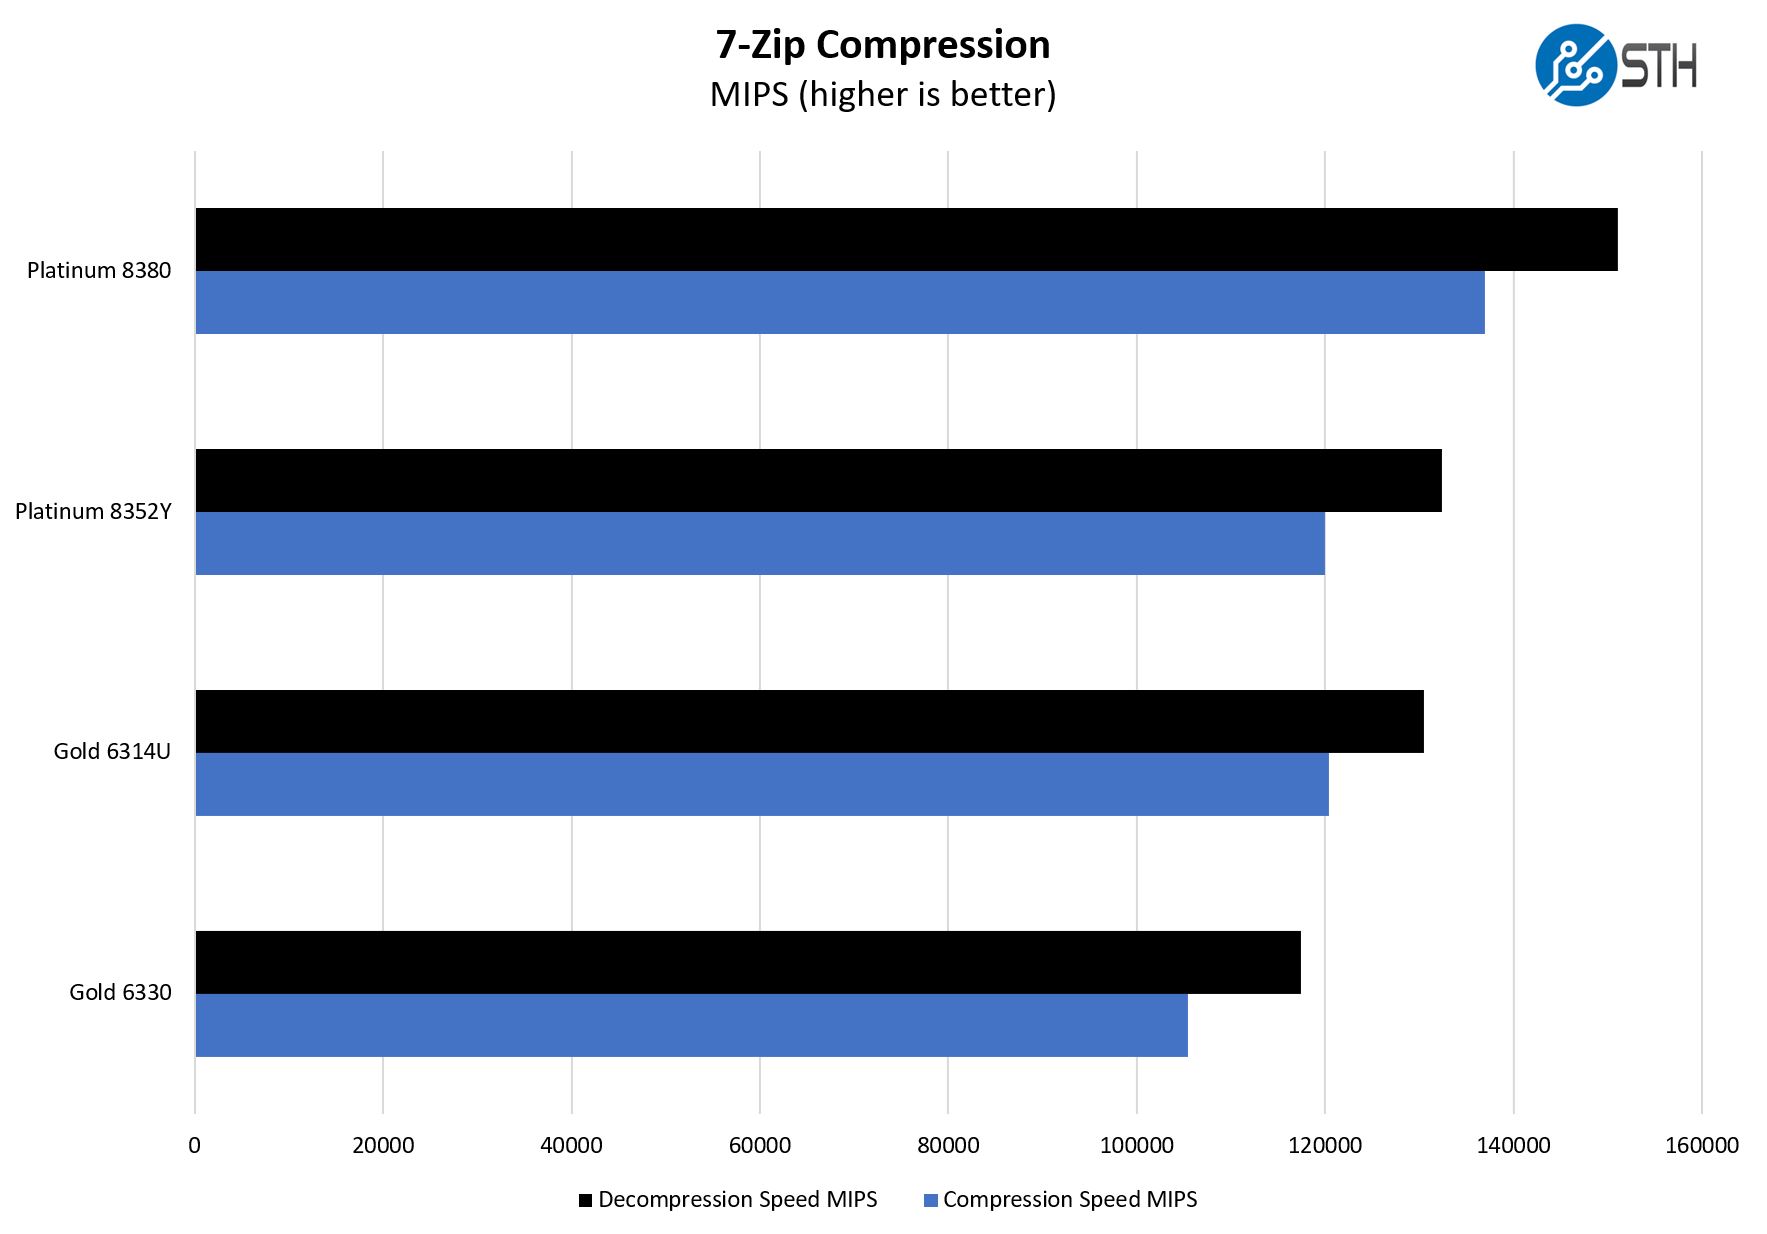 Supermicro SYS 510P WTR 7zip Compression Benchmark